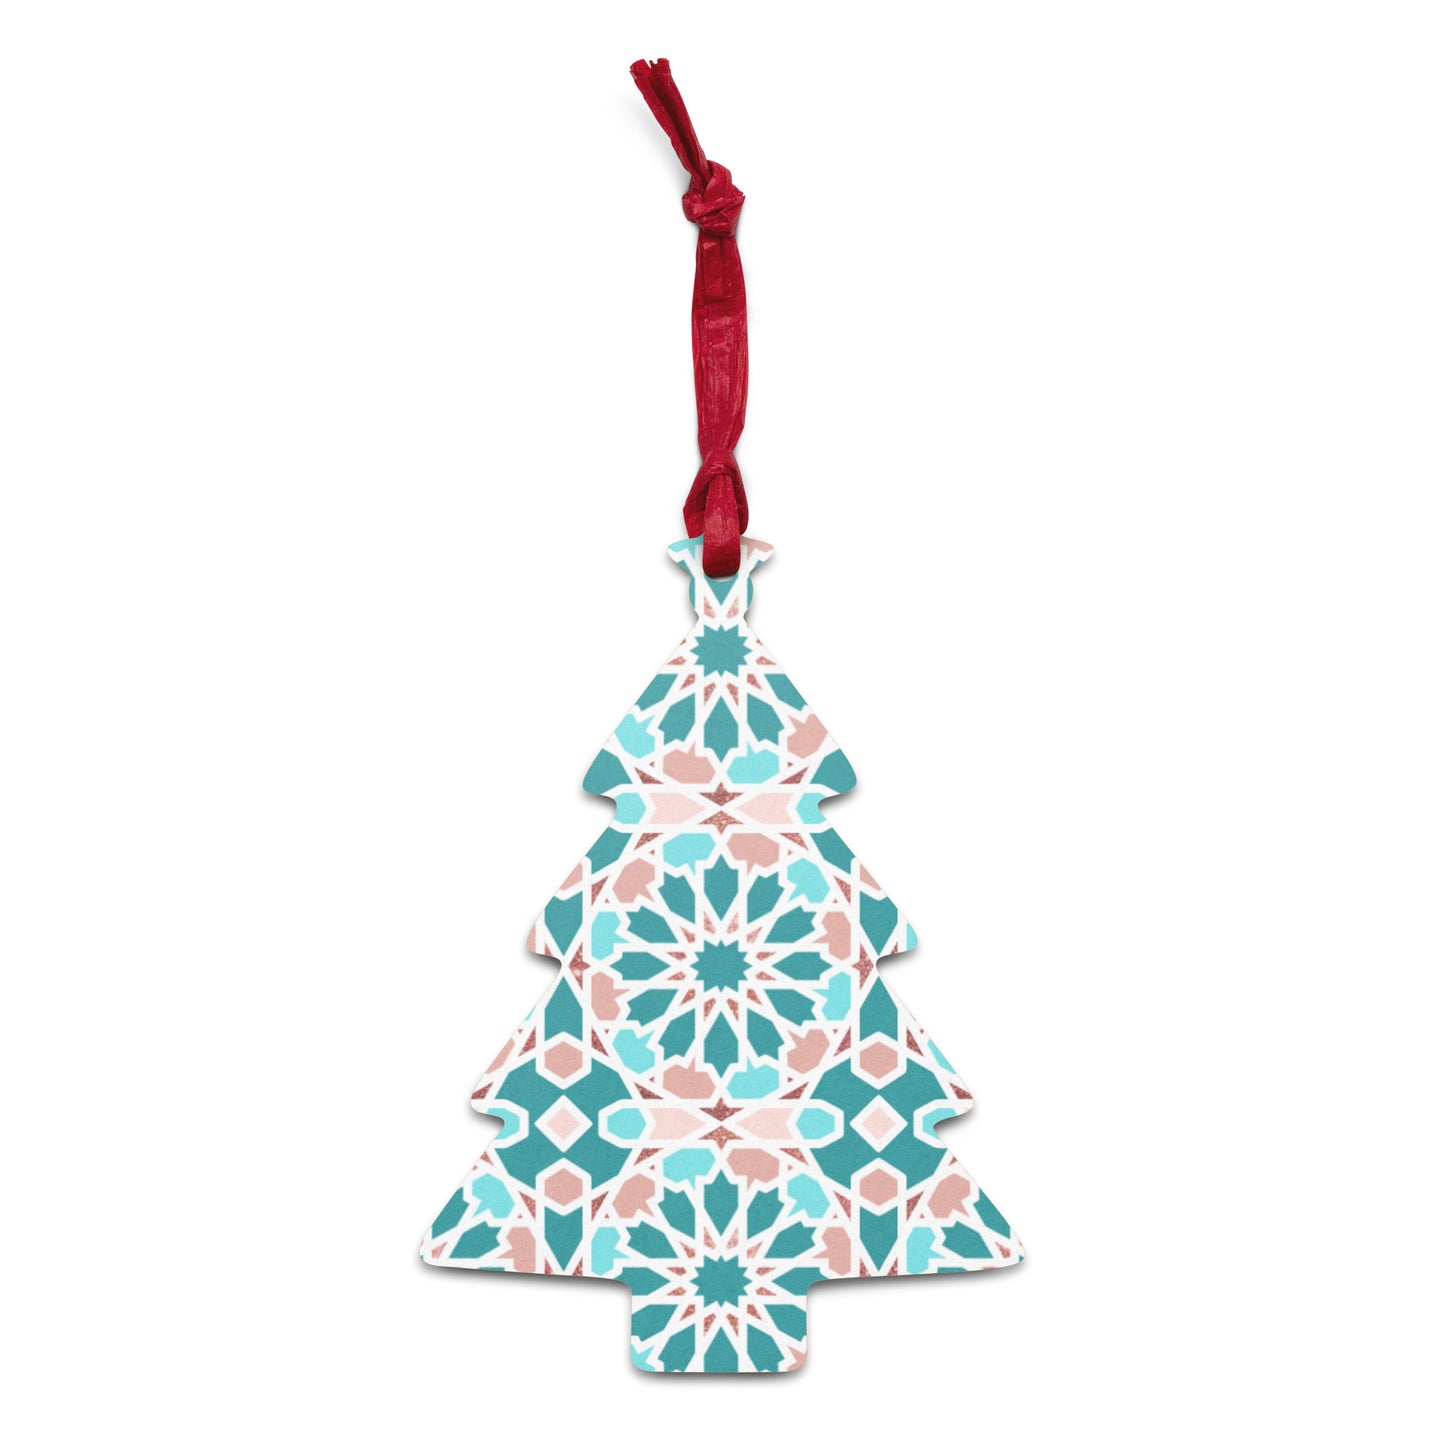 Wooden Holiday Ornaments - Arabian Geometric Star in Red Sea Colors